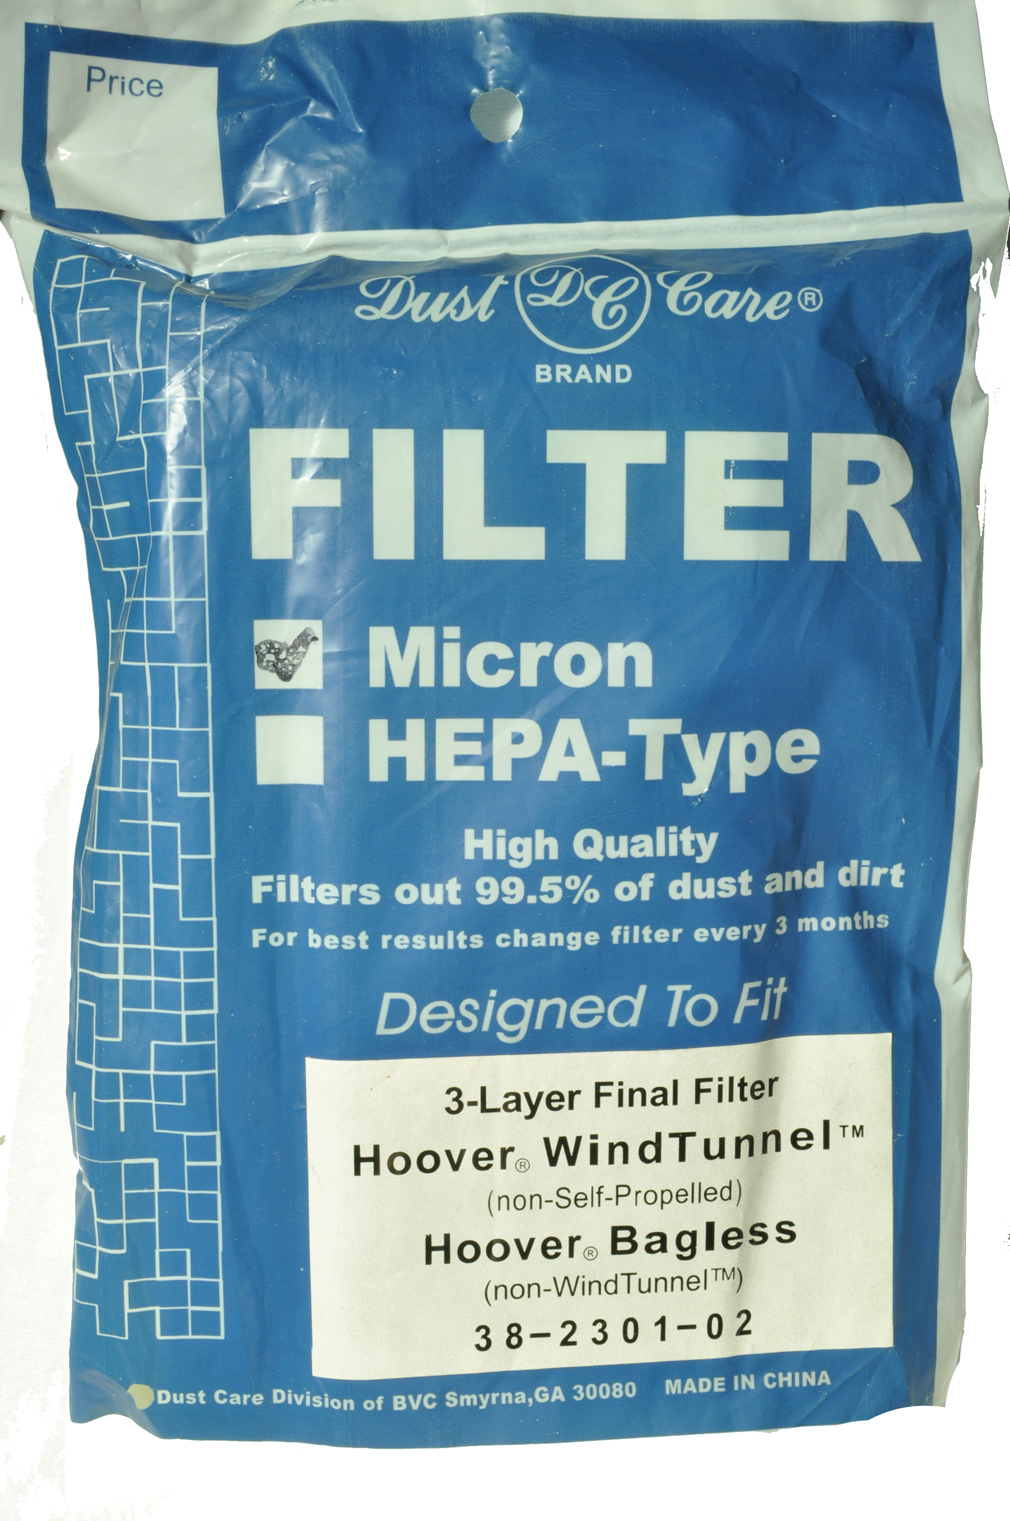 Hoover Wind Tunnel Non-Self Propelled and Hoover Bagless Wind Tunnel Micron Filter 2 pack Upright Vacuum Cleaner Micron Filter